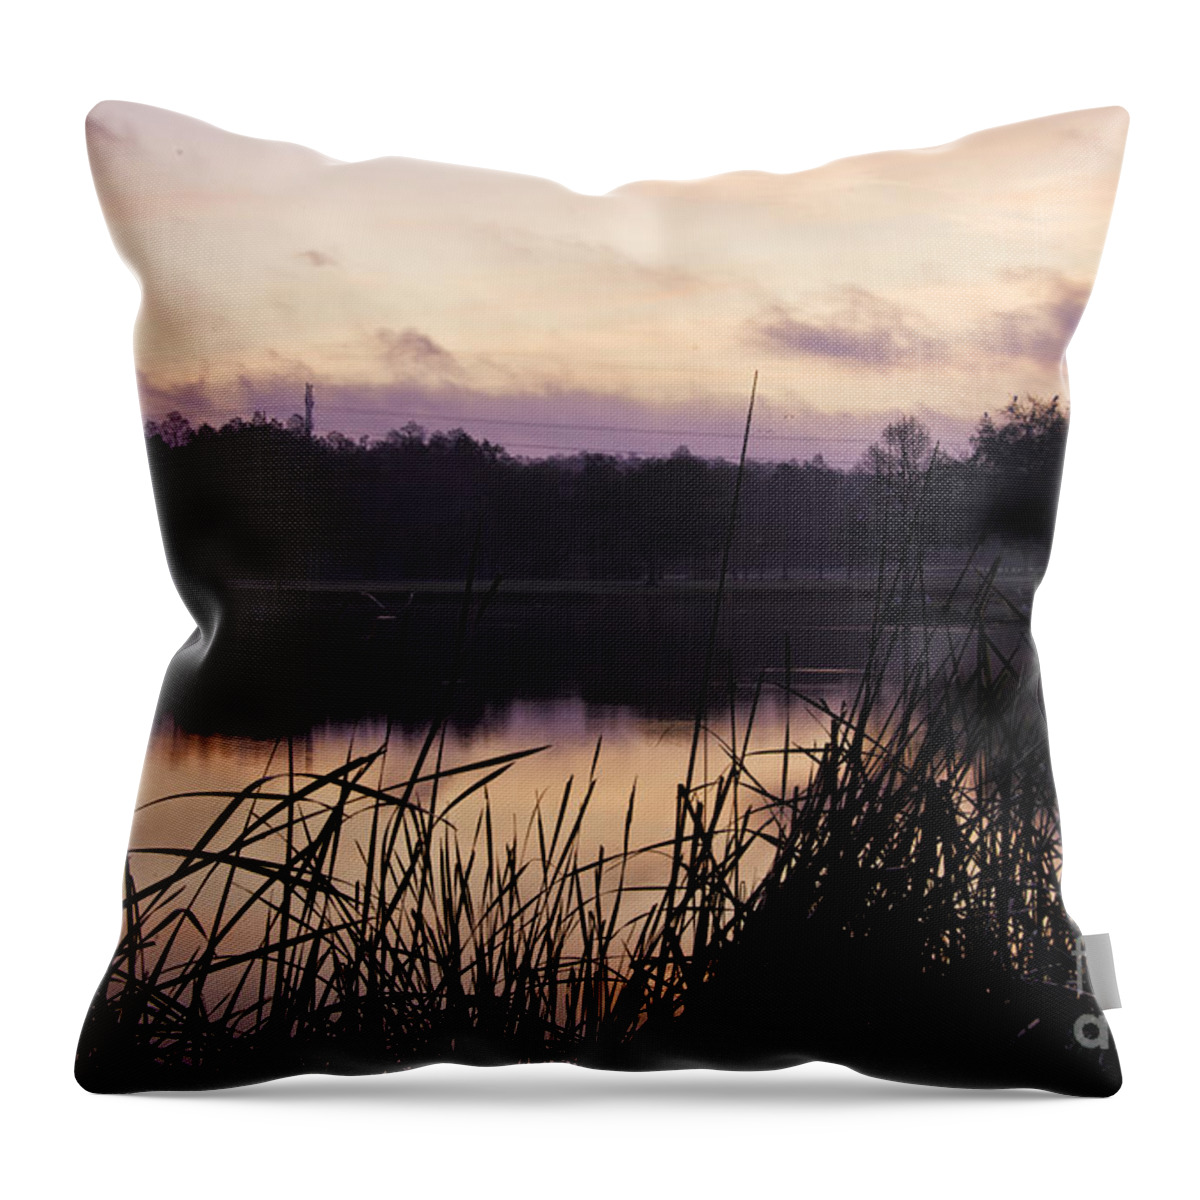 Florida Throw Pillow featuring the photograph Sunrise At Innisbrook by Timothy Hacker